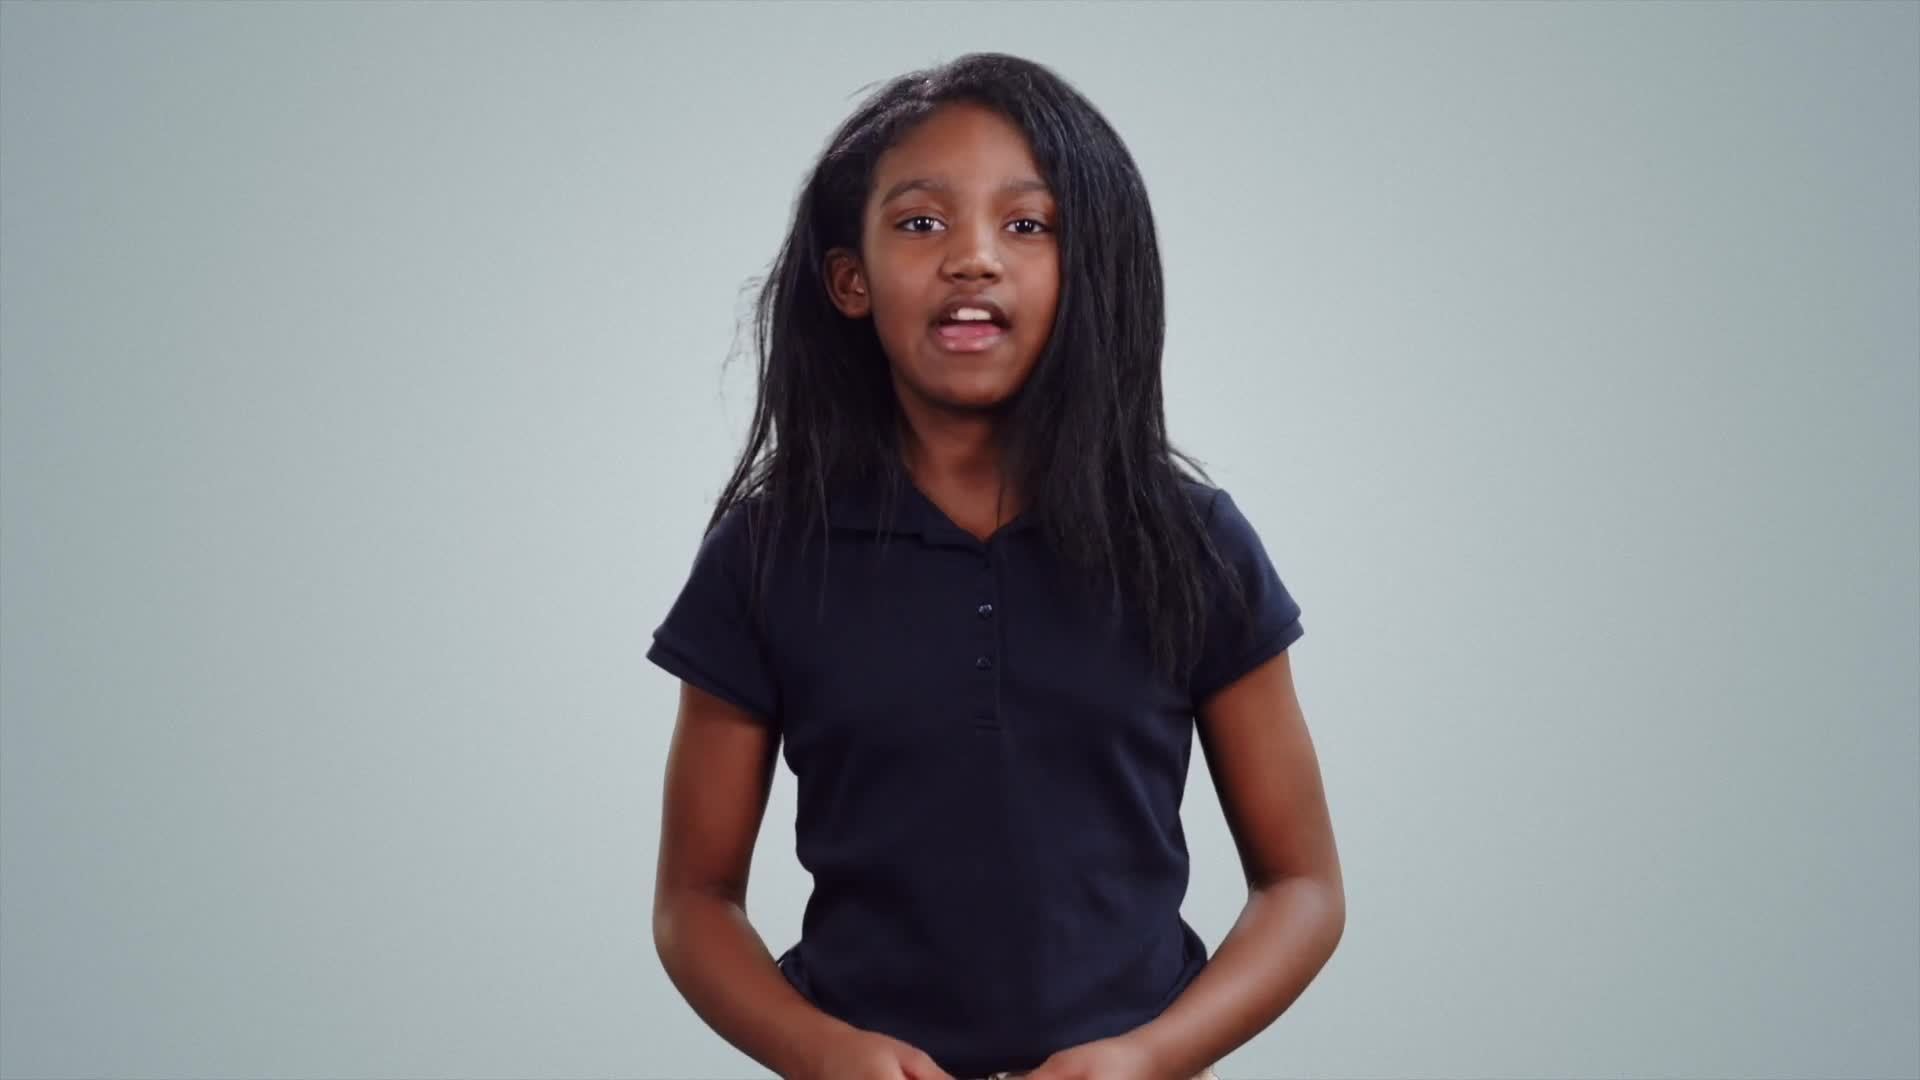 Take Action for Gender Equality (Ages 5 - 11)